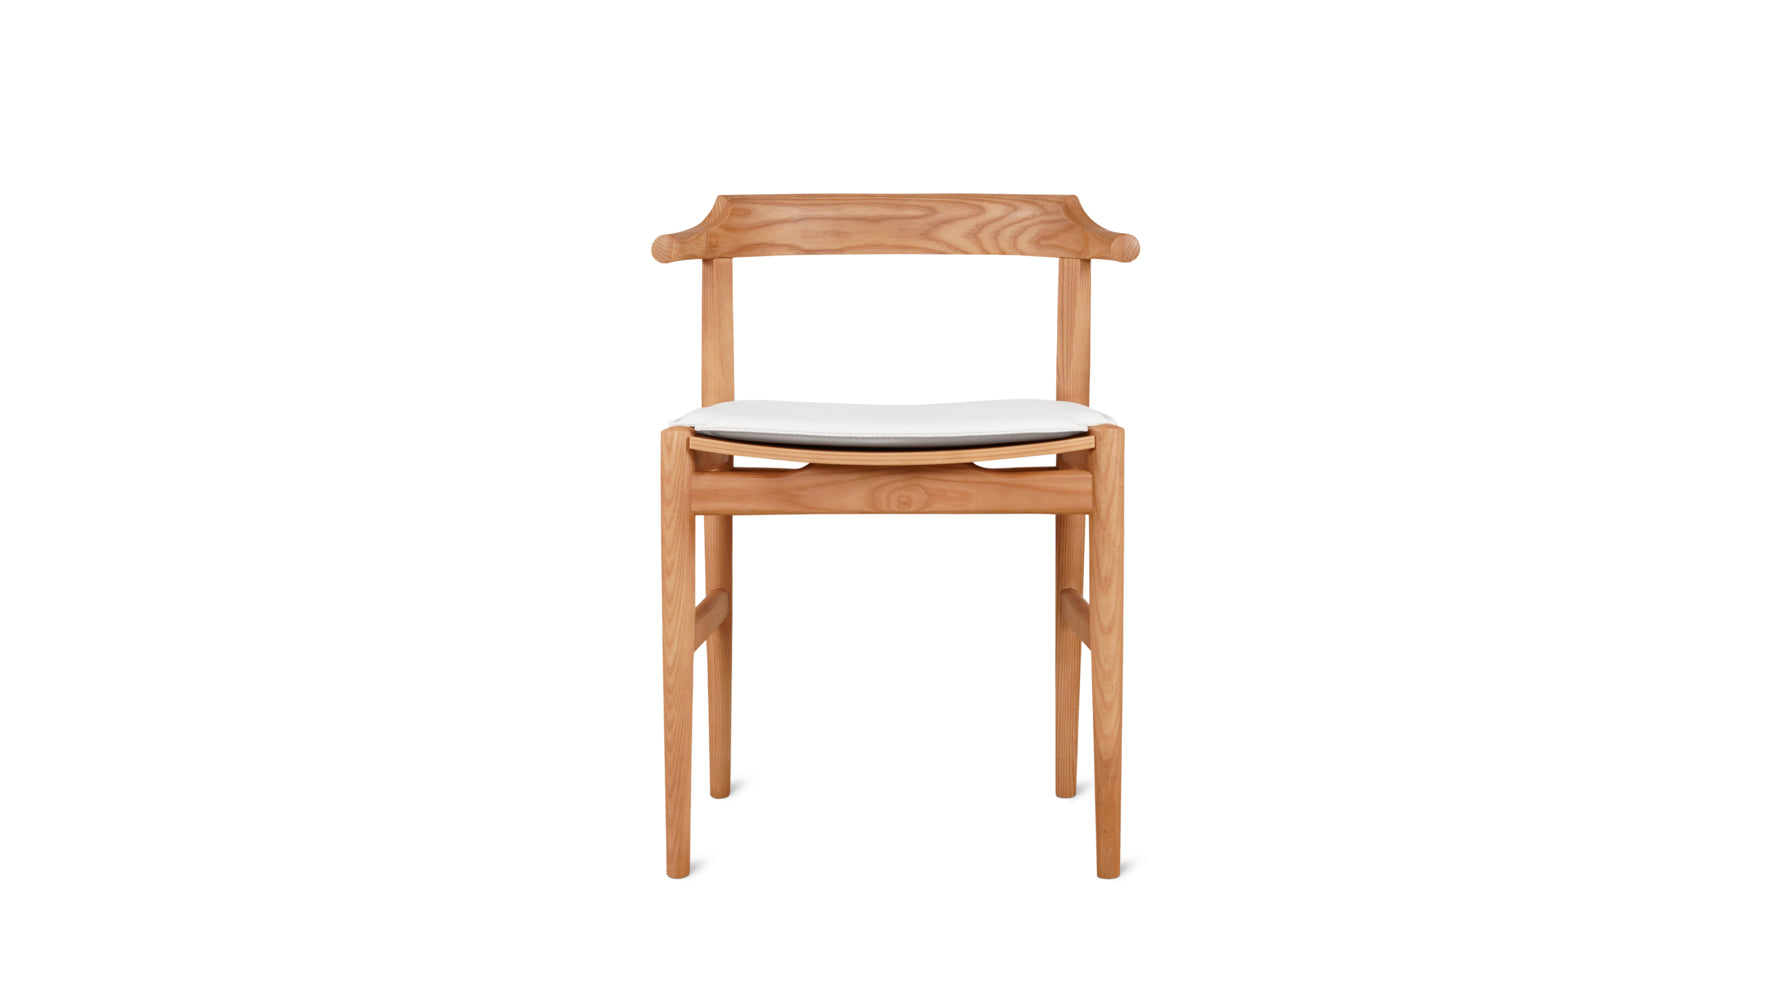 Tuck In Dining Chair with Cushion, White Oak, Wood Seat with White Cushion - Image 1